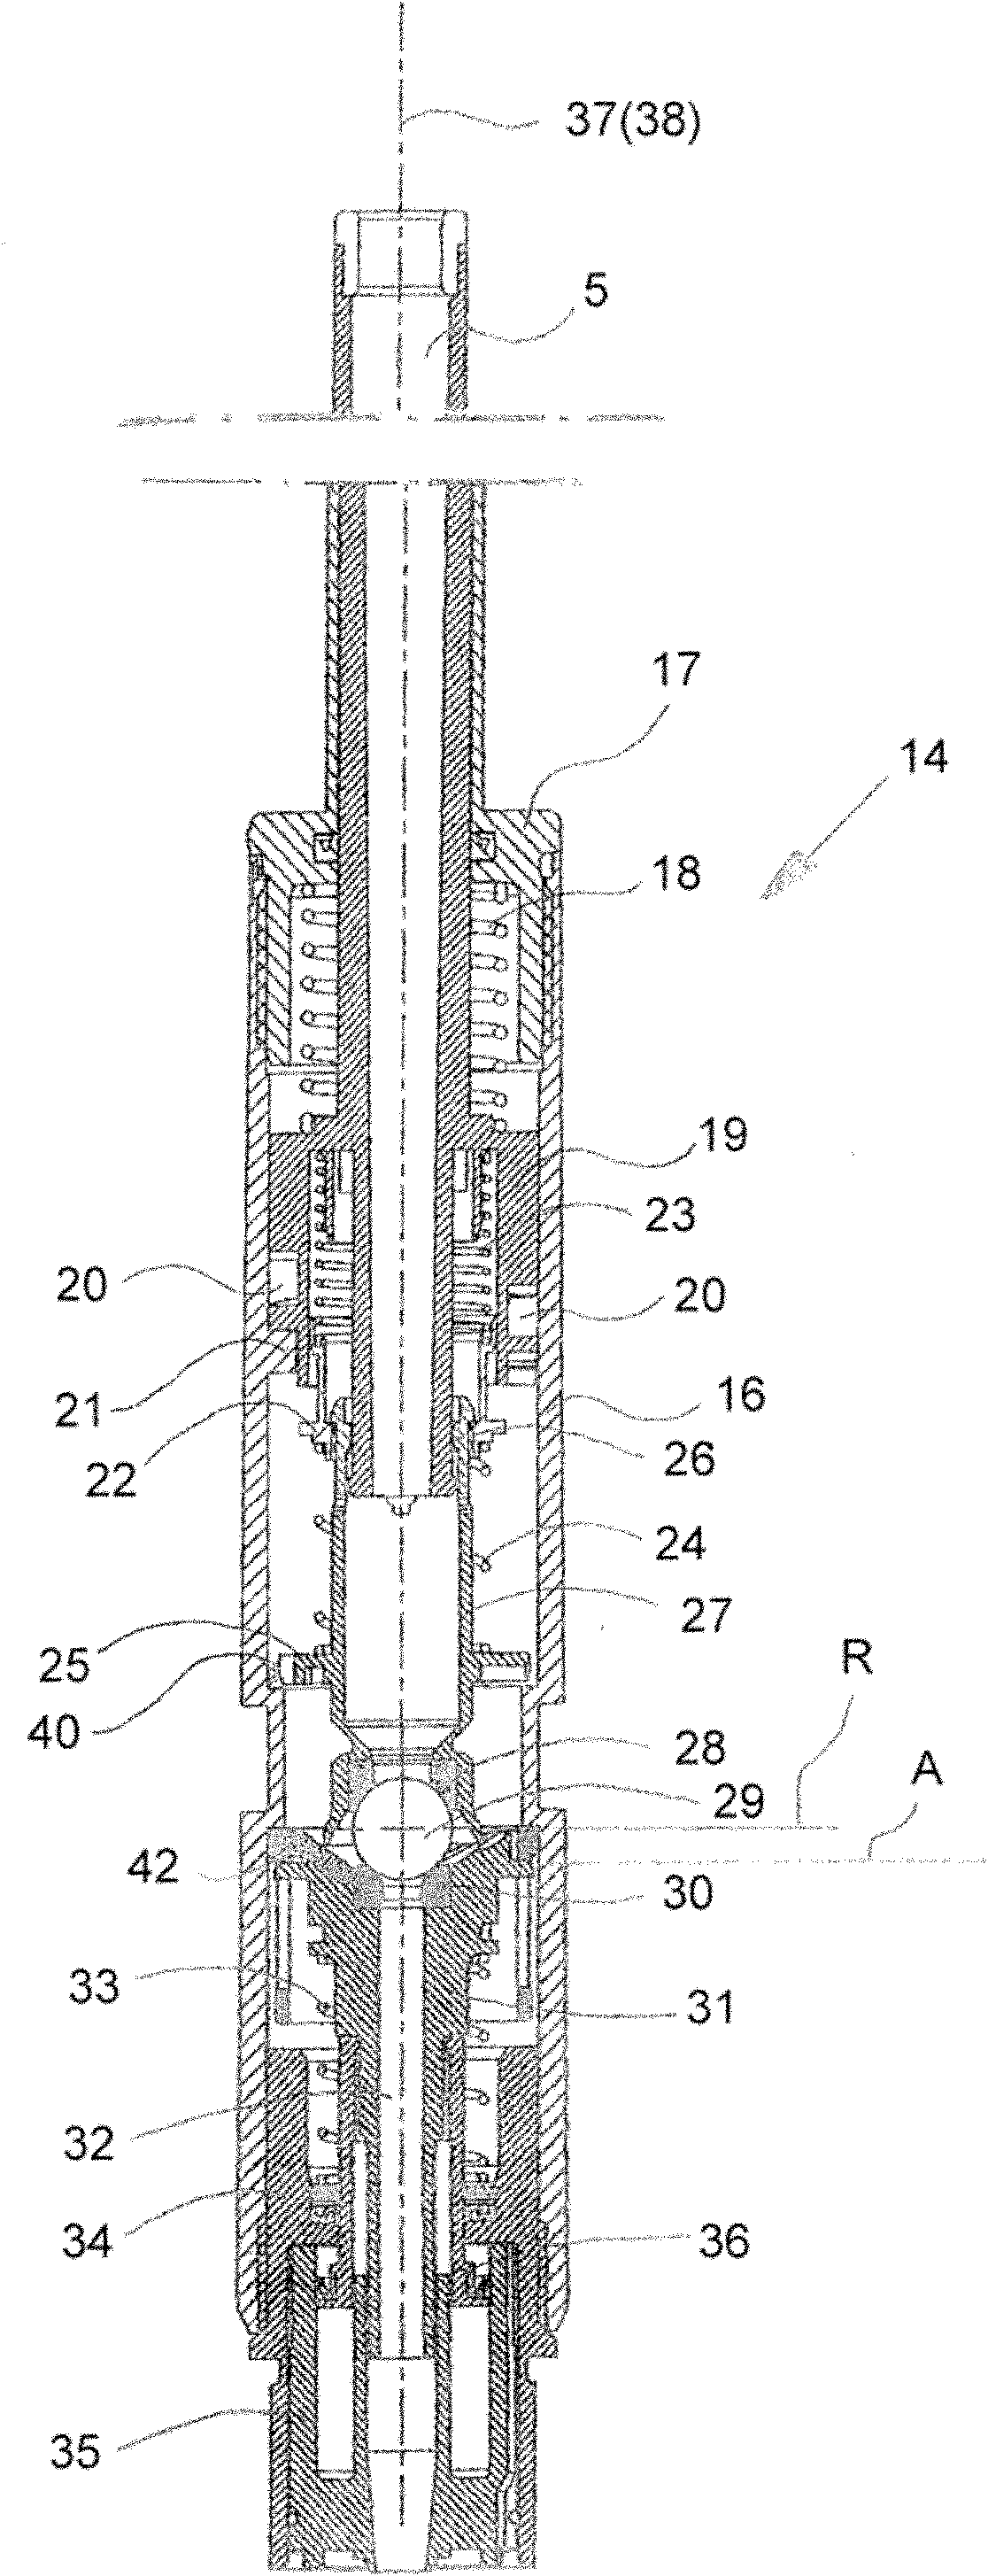 Yarn tension device for a double-strand twisting spindle